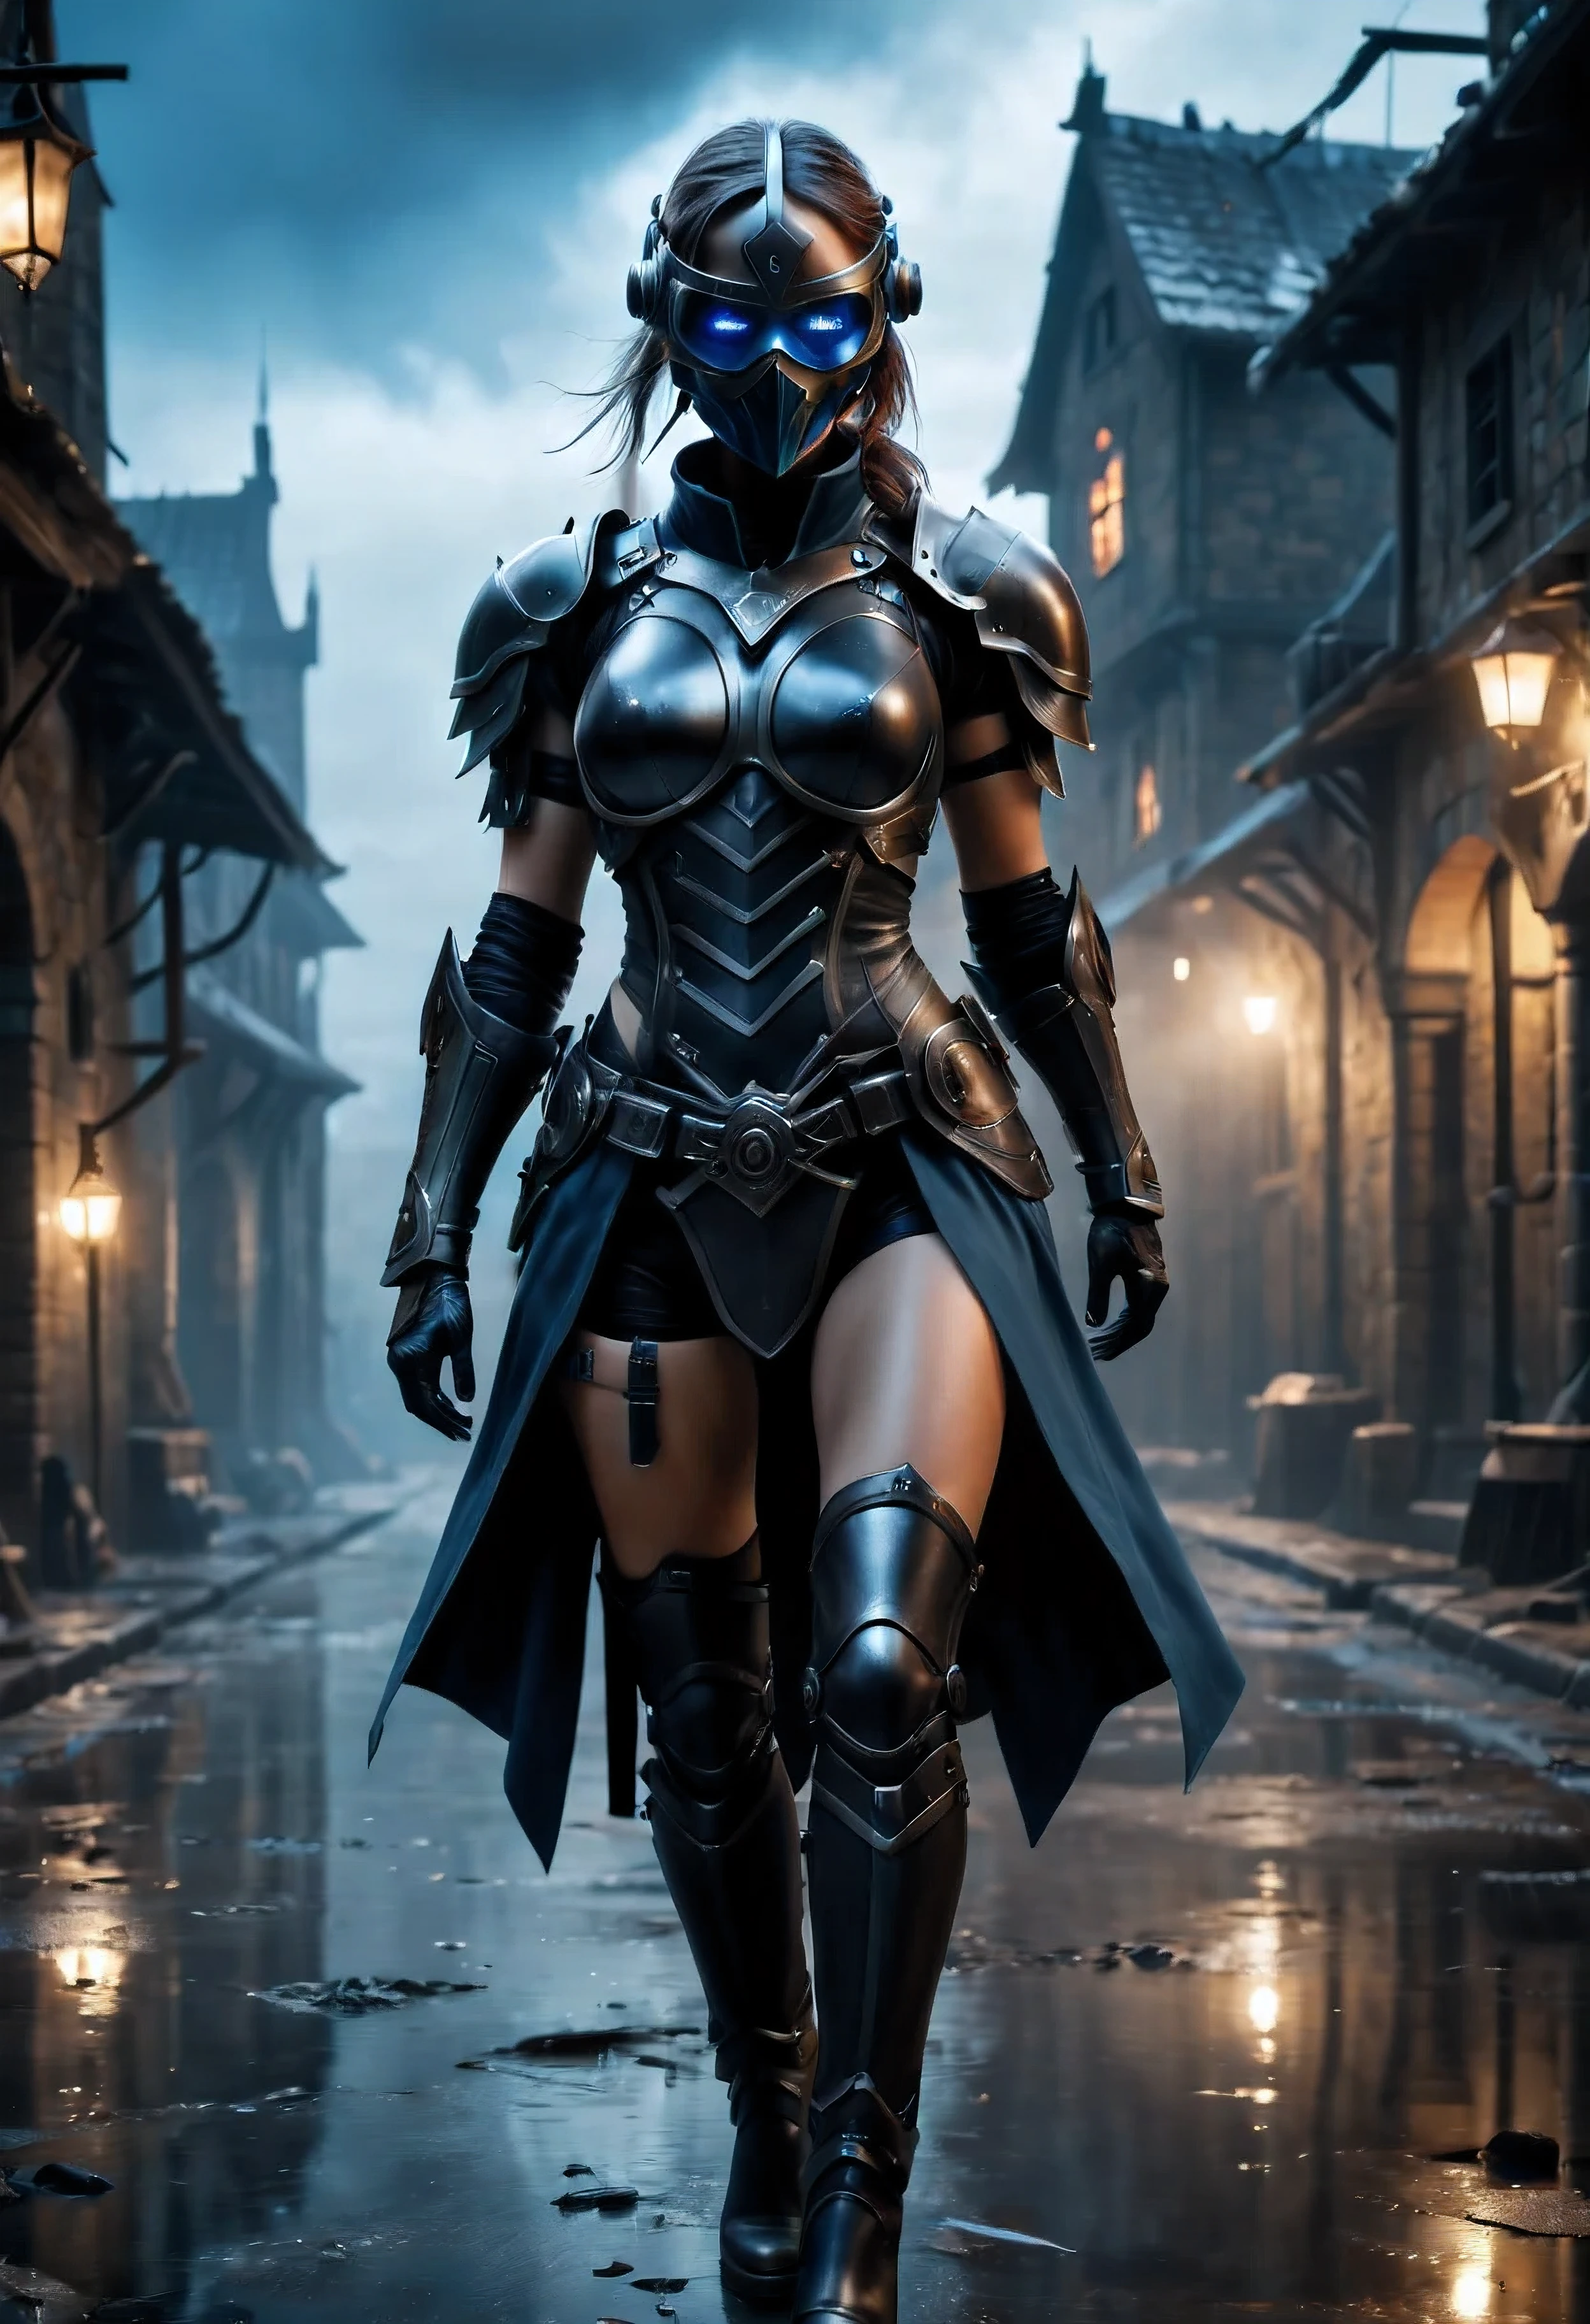 (best quality,4k,8k,highres,masterpiece:1.2),ultra-detailed,(realistic,photorealistic,photo-realistic:1.37),female future tech soldier dressed with black face mask,medieval village background,futuristic armor, glowing blue visor, futuristic weapon,advanced exoskeleton,sci-fi,nighttime,foggy atmosphere,dark clouds,heavy rain,moody lighting,medieval ruins,gritty textures,mysterious aura,sharp shadows,steampunk elements,post-apocalyptic,grim and dystopian feel,desolate streets,abandoned buildings,steam rising from vents,high-tech gadgets,advanced holographic displays,enhanced vision capabilities,excellent aim and agility,intense focus,covert operation,technology merging with ancient world,contrast between old and new,secrets of the past,uncertain future,monumental task ahead.